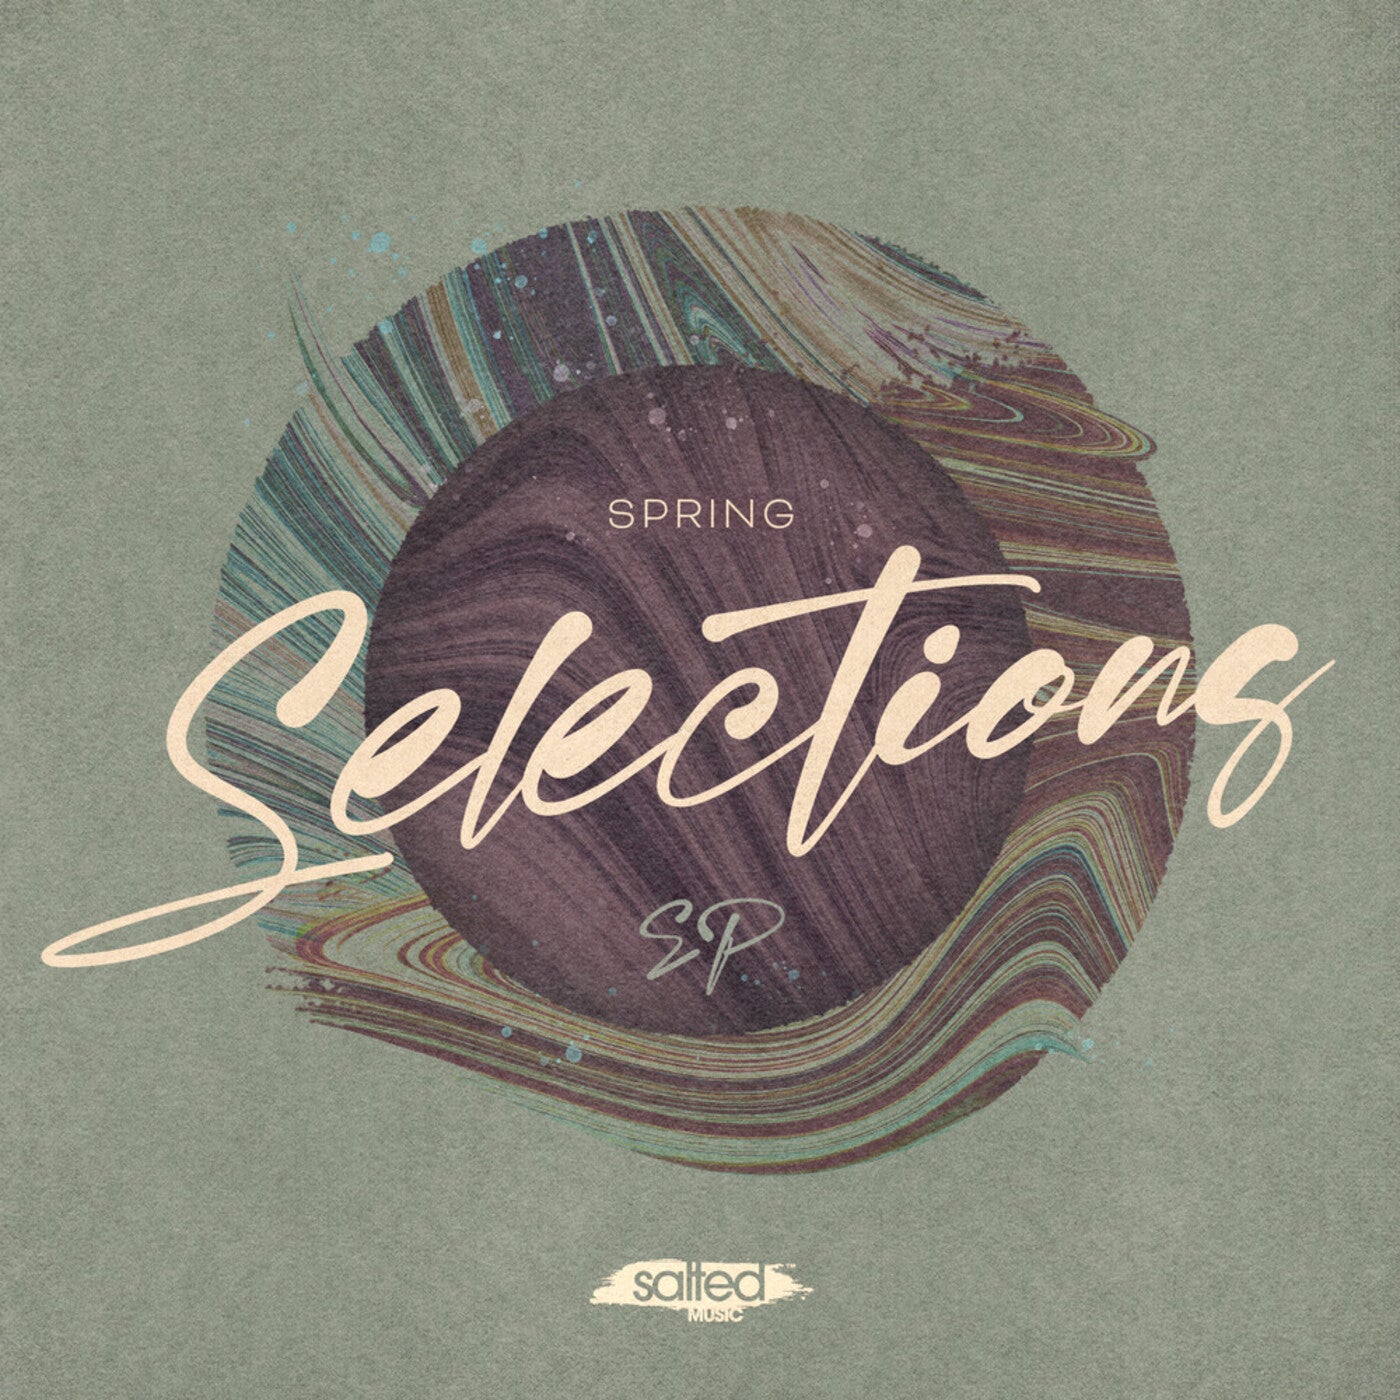 Download Spring Selections on Electrobuzz